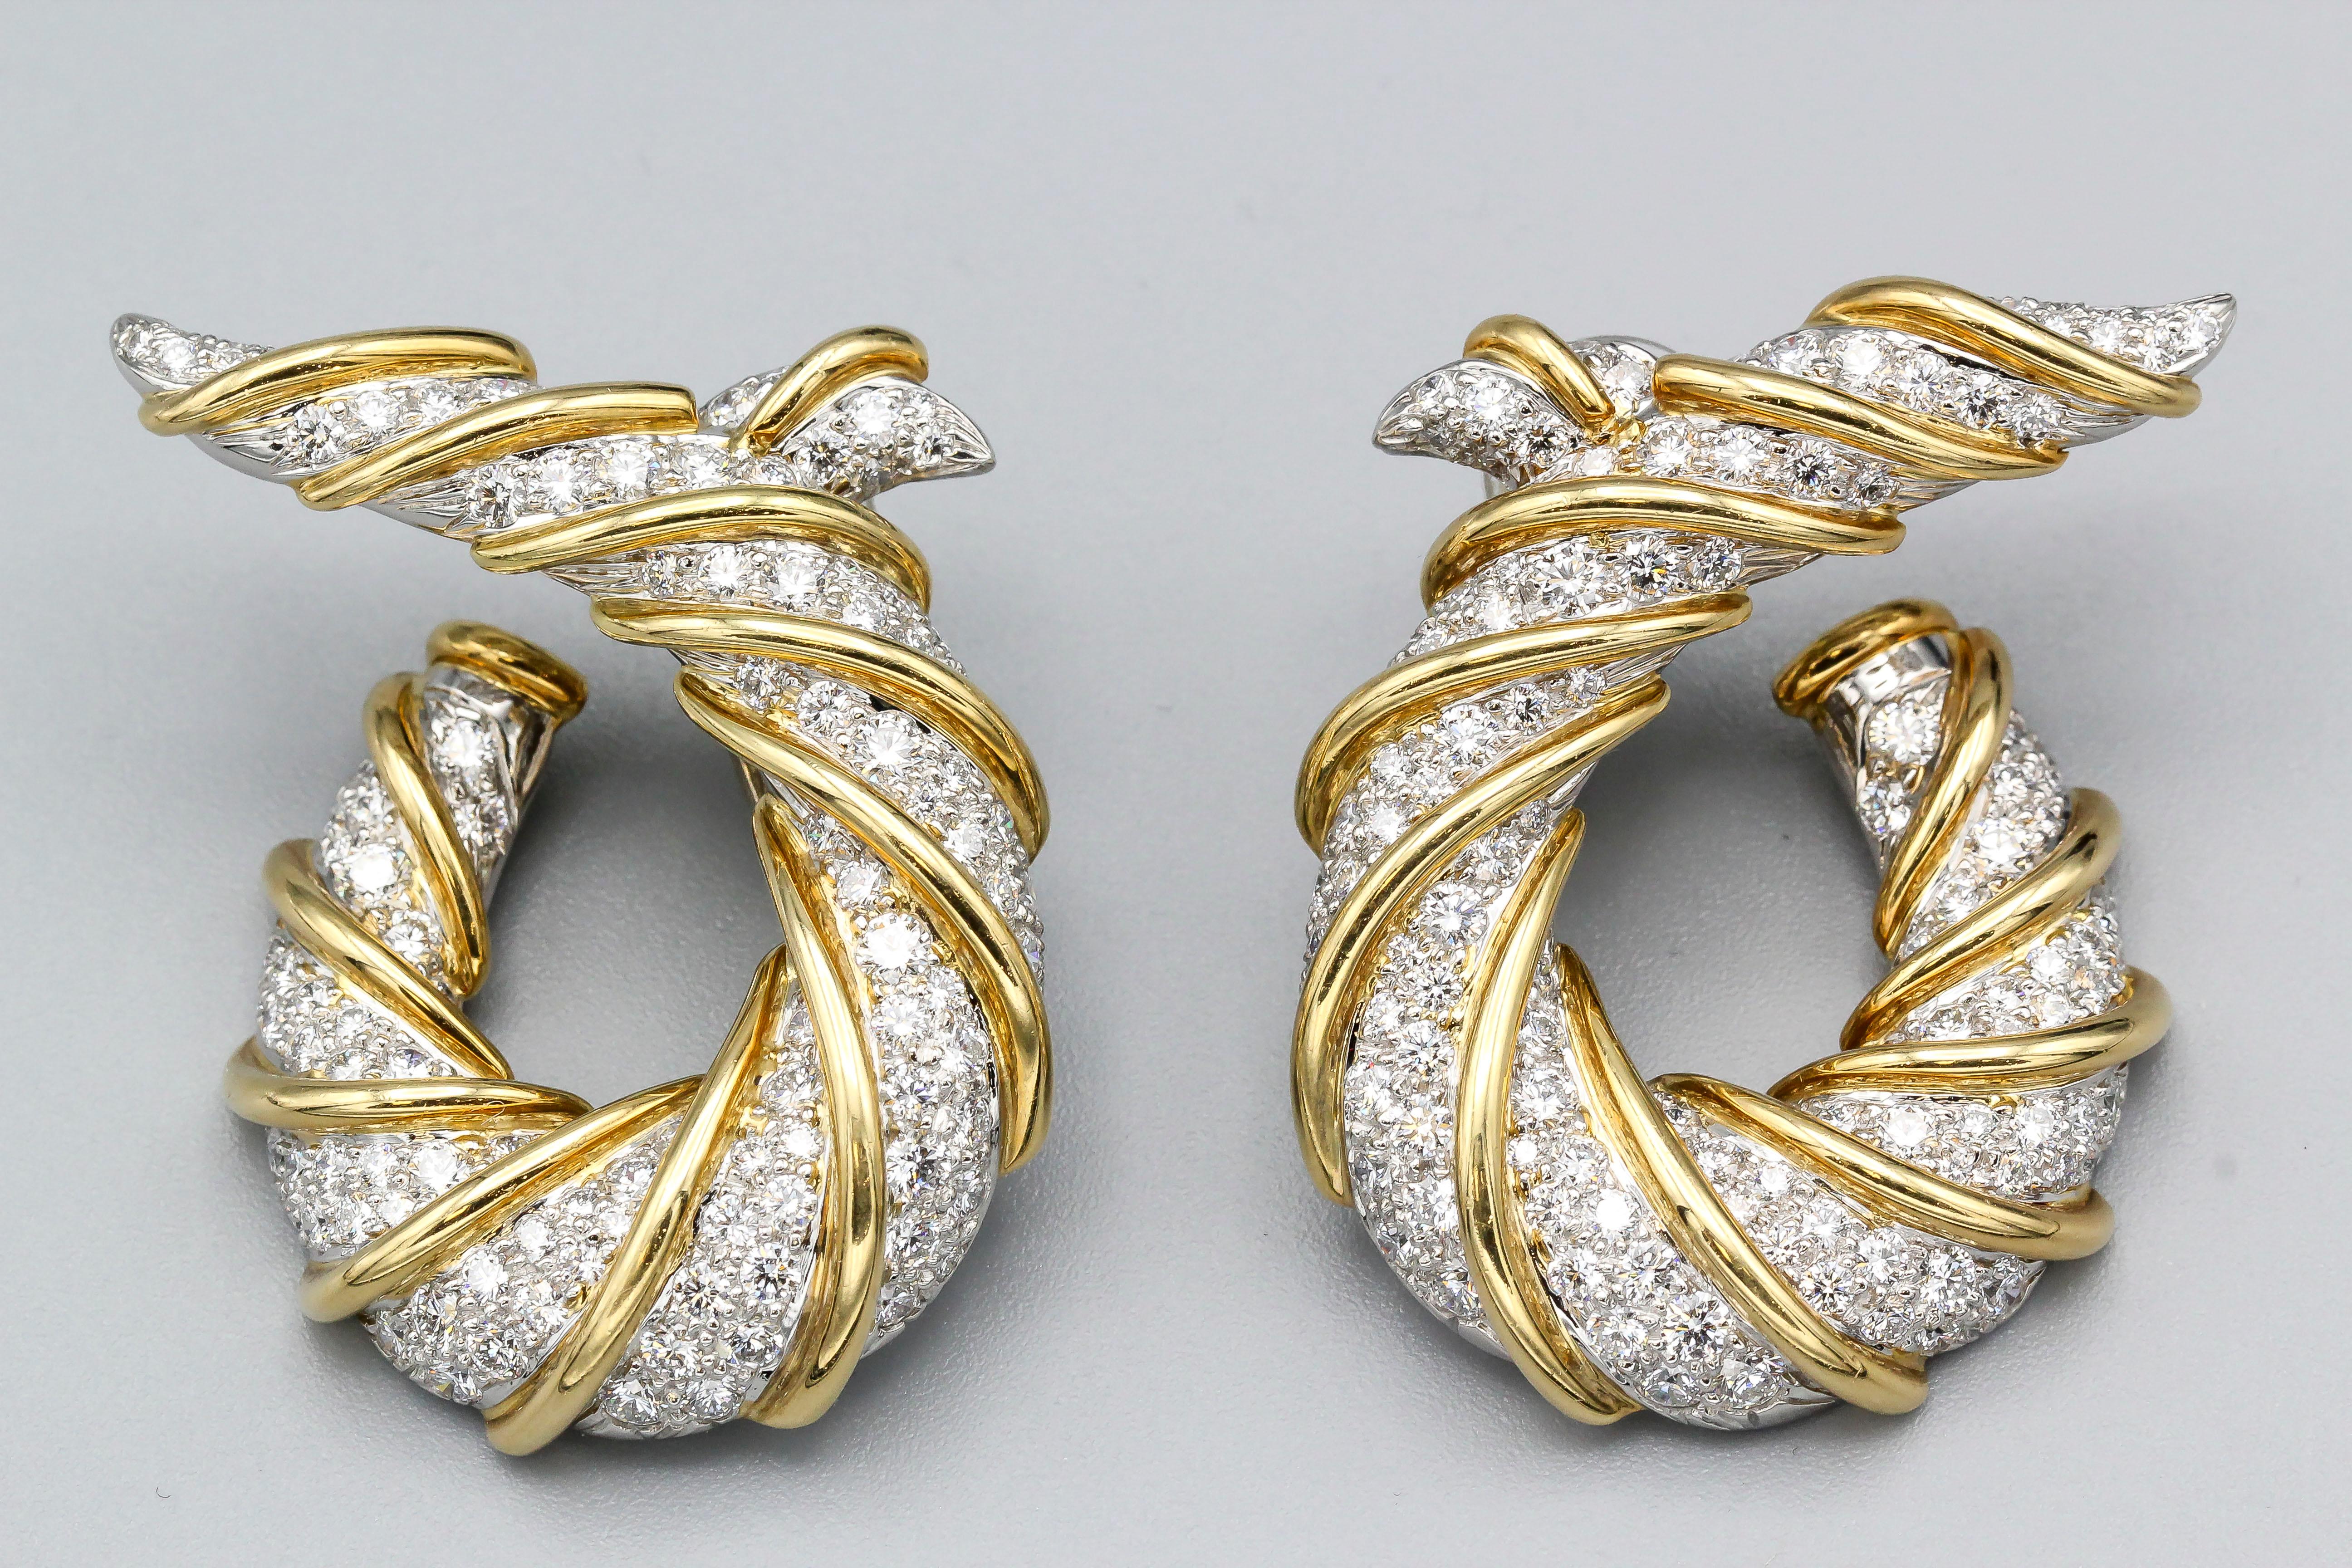 Rare elegant platinum, diamond and 18K yellow gold earclips from the 